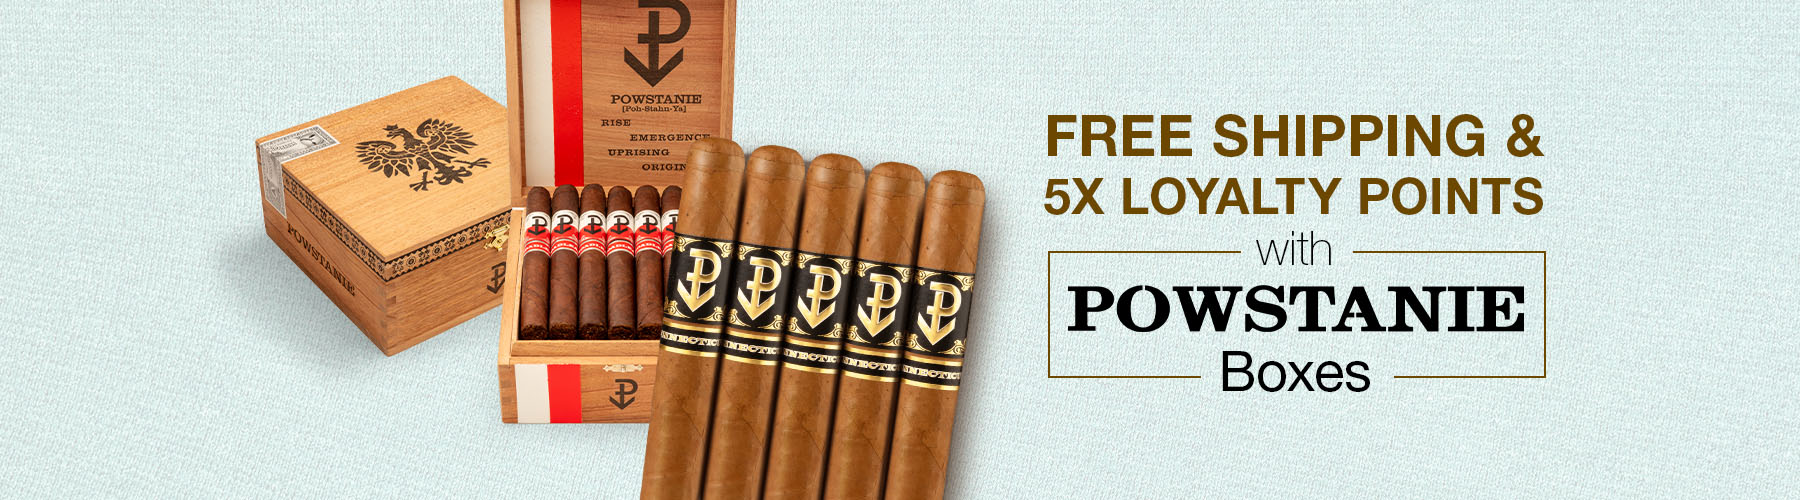 Free Shipping & 5X Loyalty Points with Powstanie boxes!